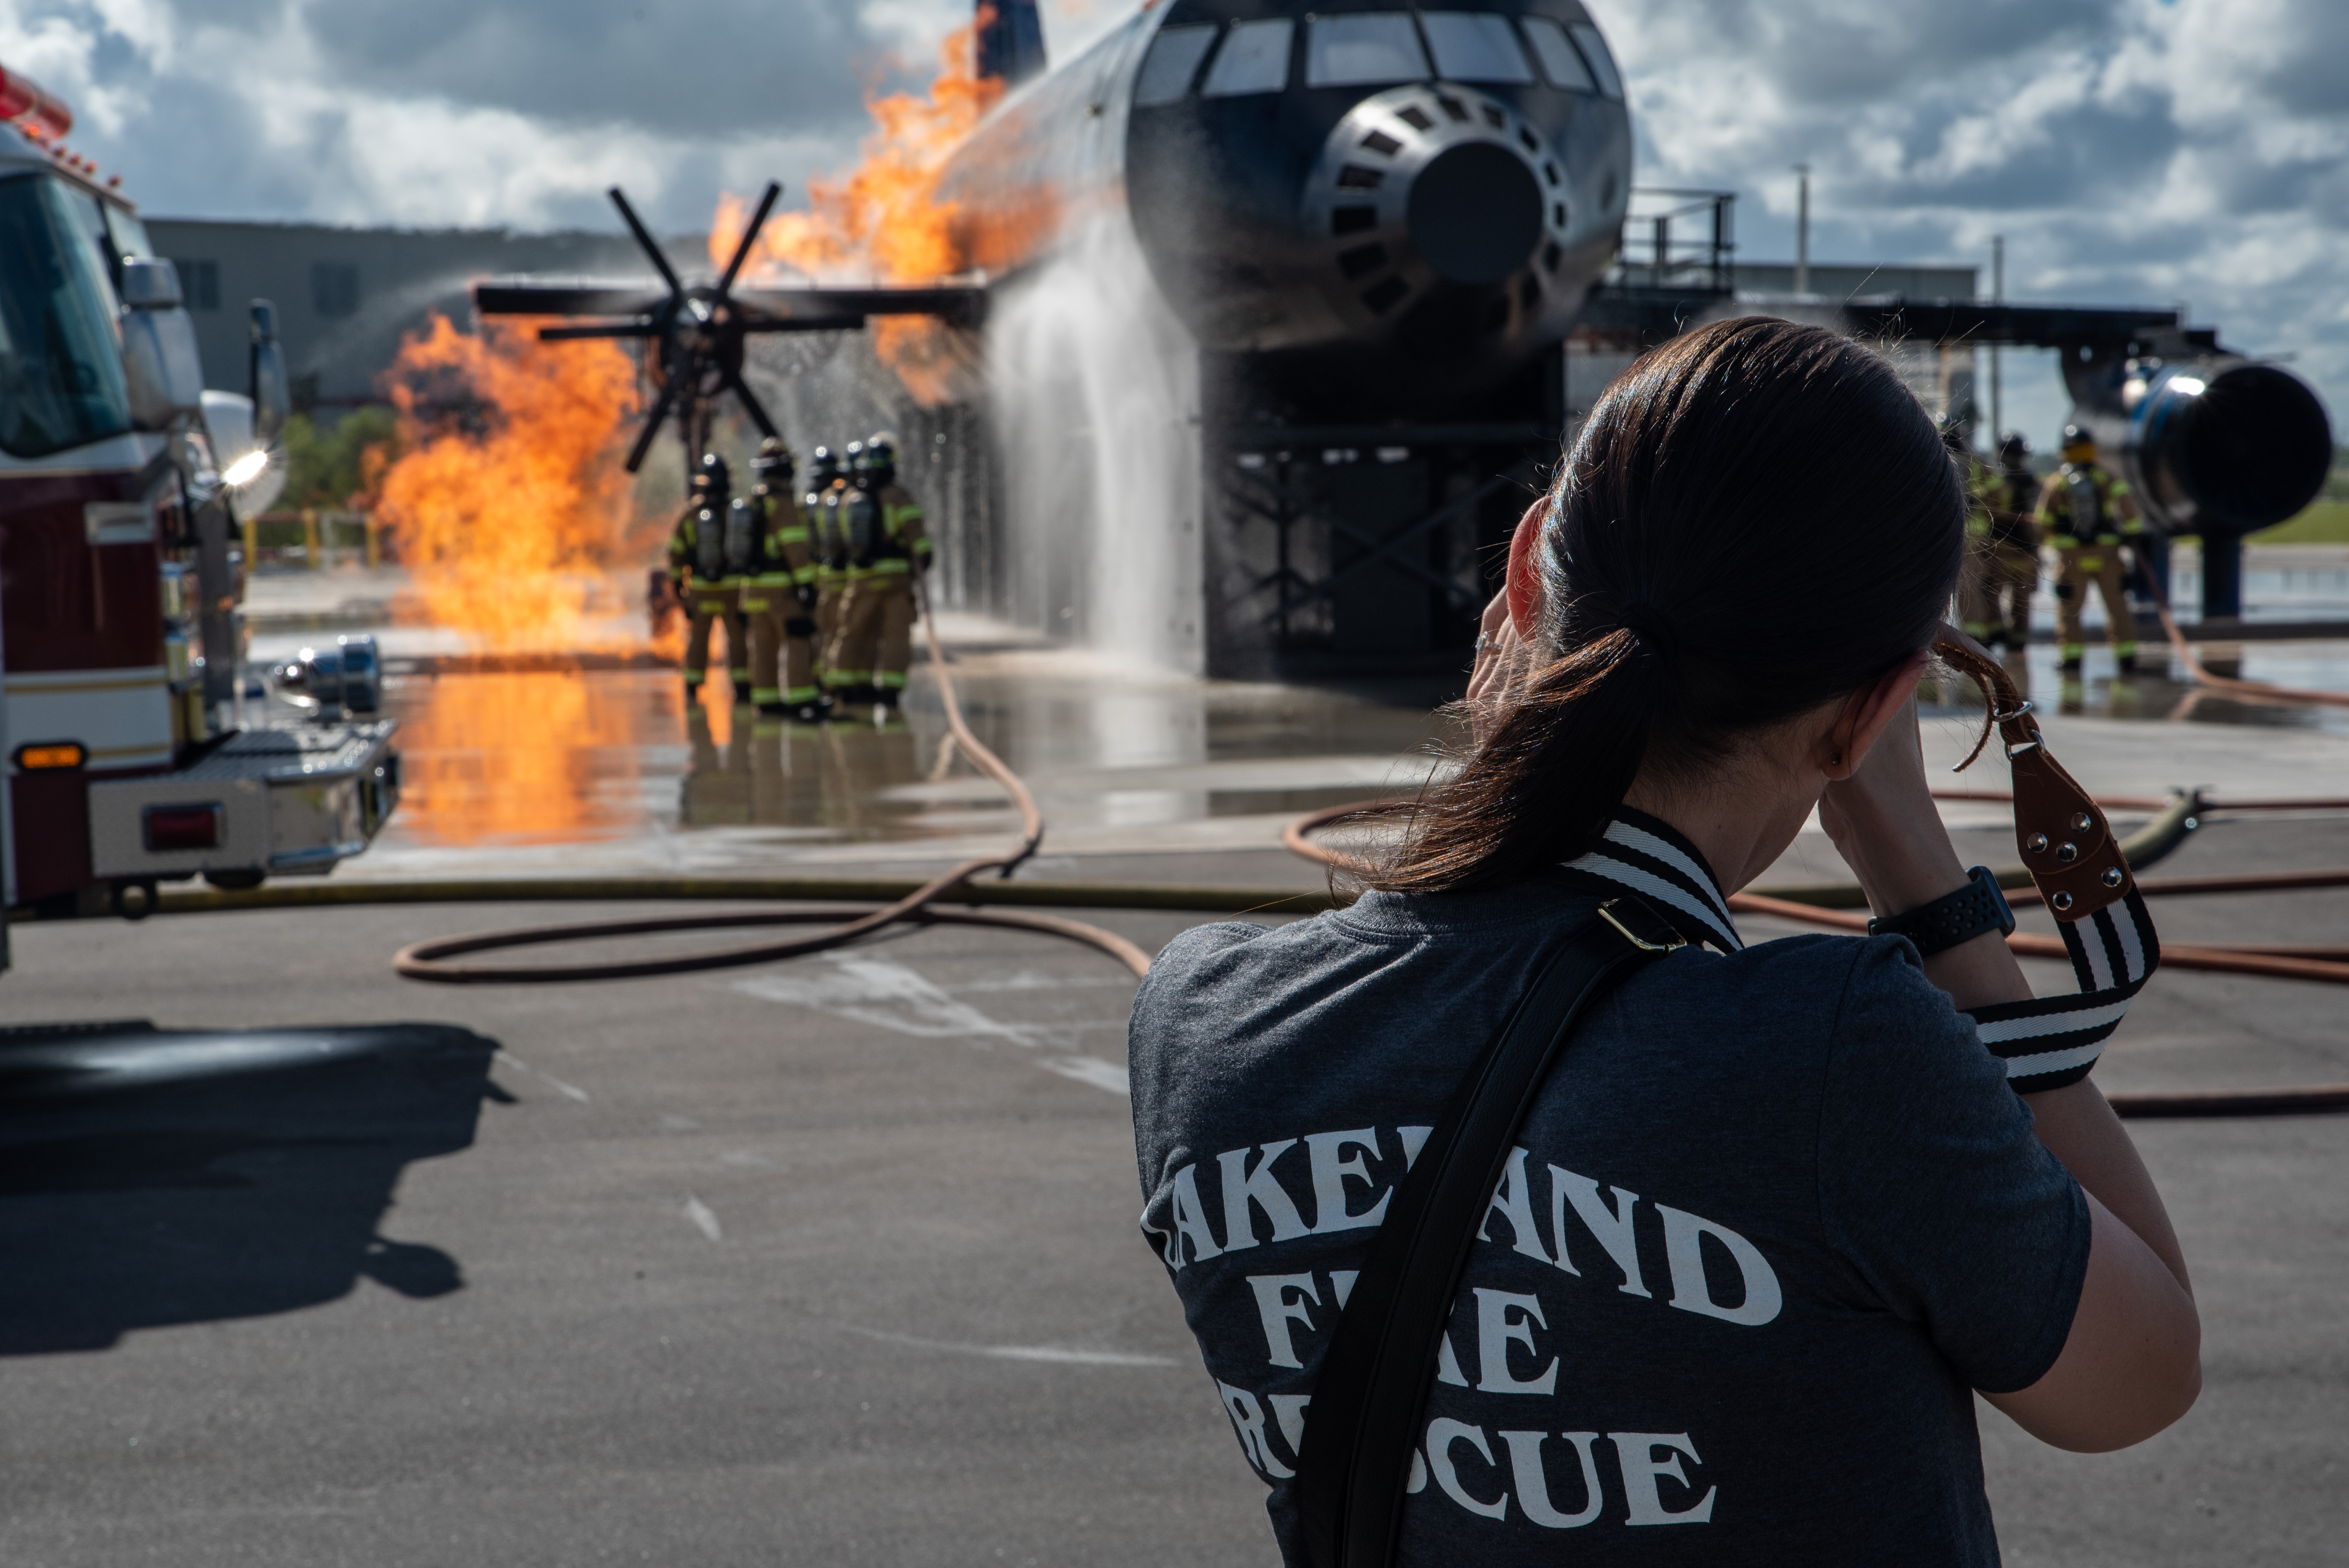 Public Relations & Information Manager at ARFF Training